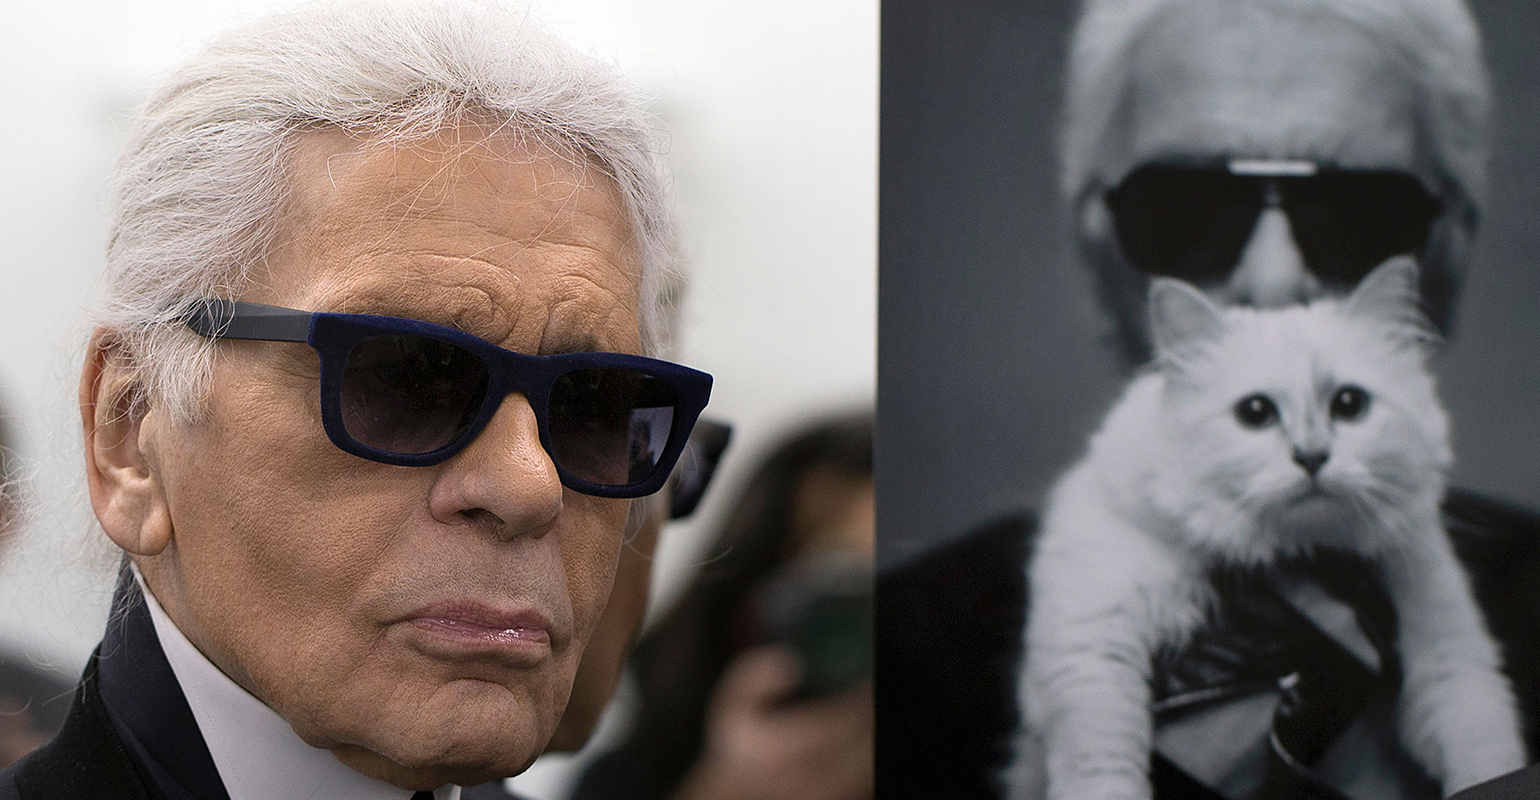 Dead Celebrity Podcast: Karl Lagerfeld and His Cat | Wealth Management